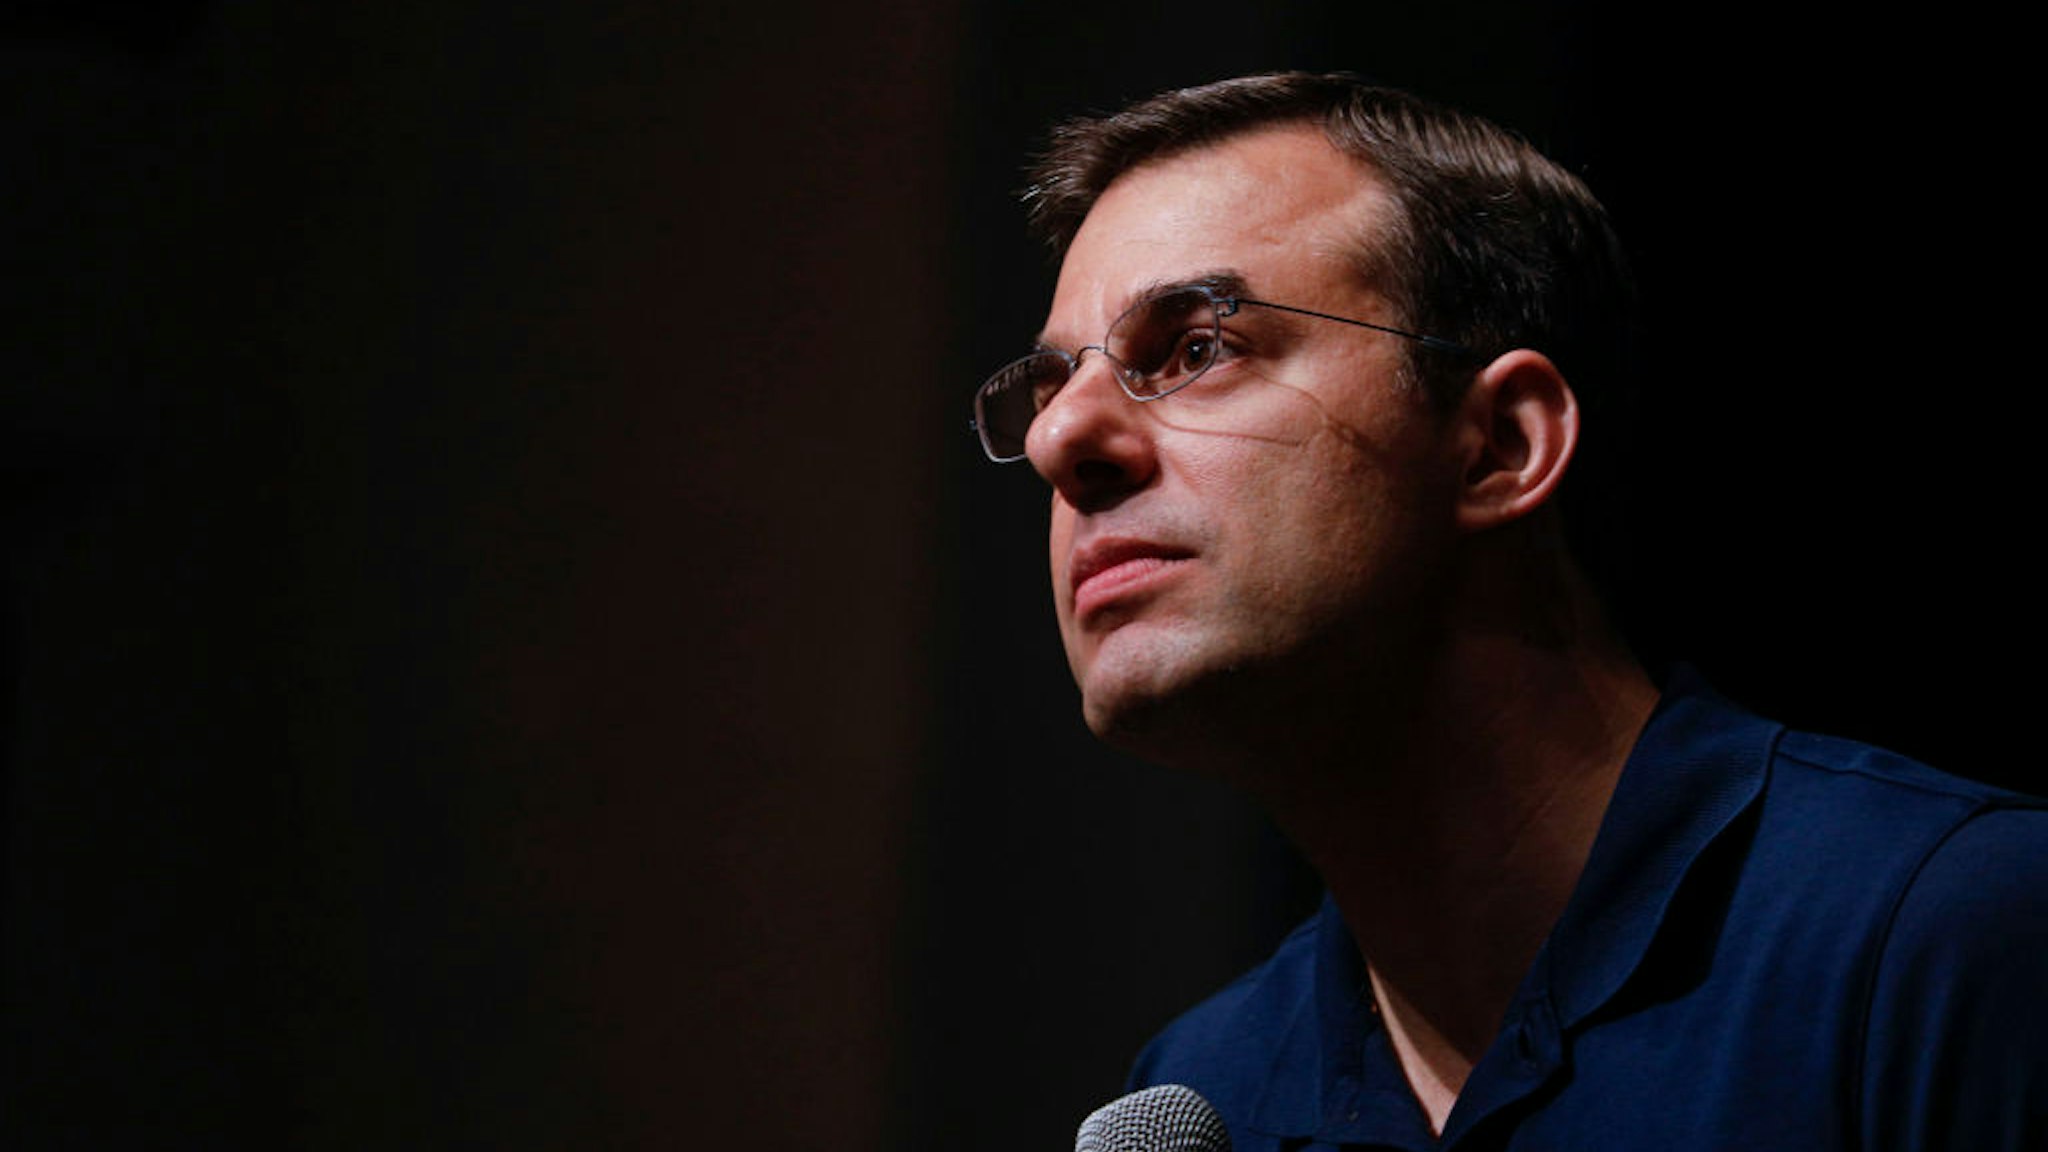 U.S. Rep. Justin Amash (R-MI) holds a Town Hall Meeting on May 28, 2019 in Grand Rapids, Michigan. Amash was the first Republican member of Congress to say that President Donald Trump engaged in impeachable conduct.